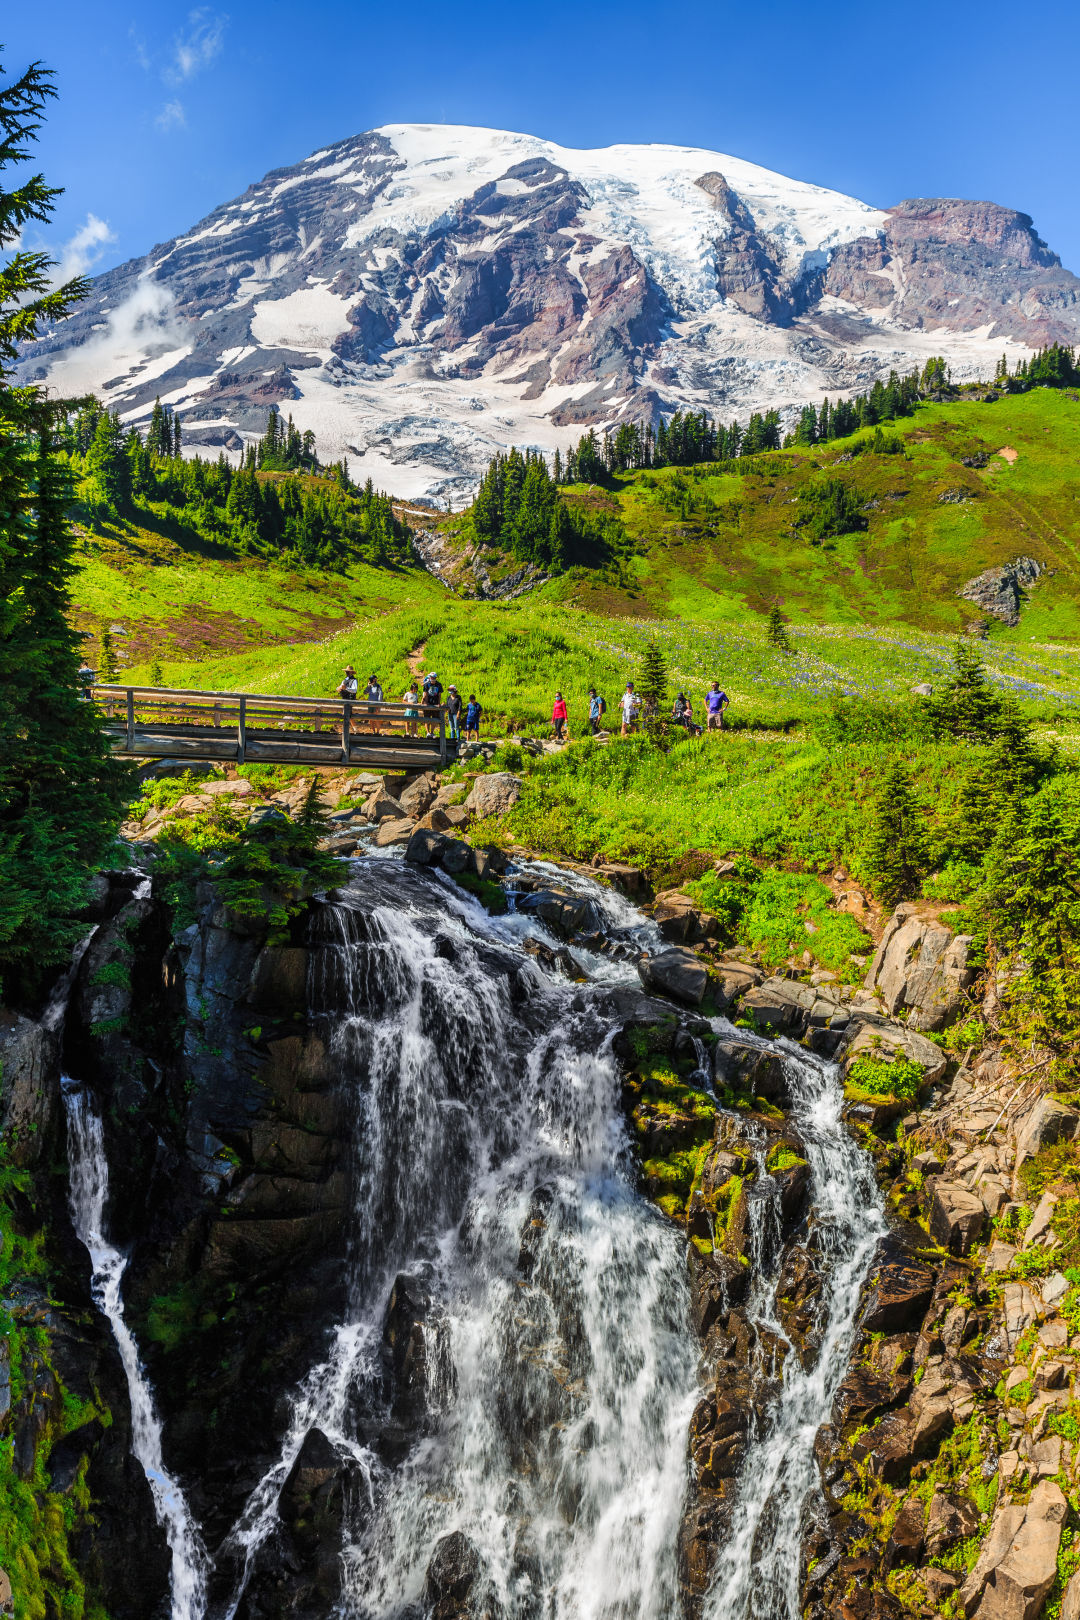 How to Camp, Hike, and Sightsee at Mount Rainier National Park